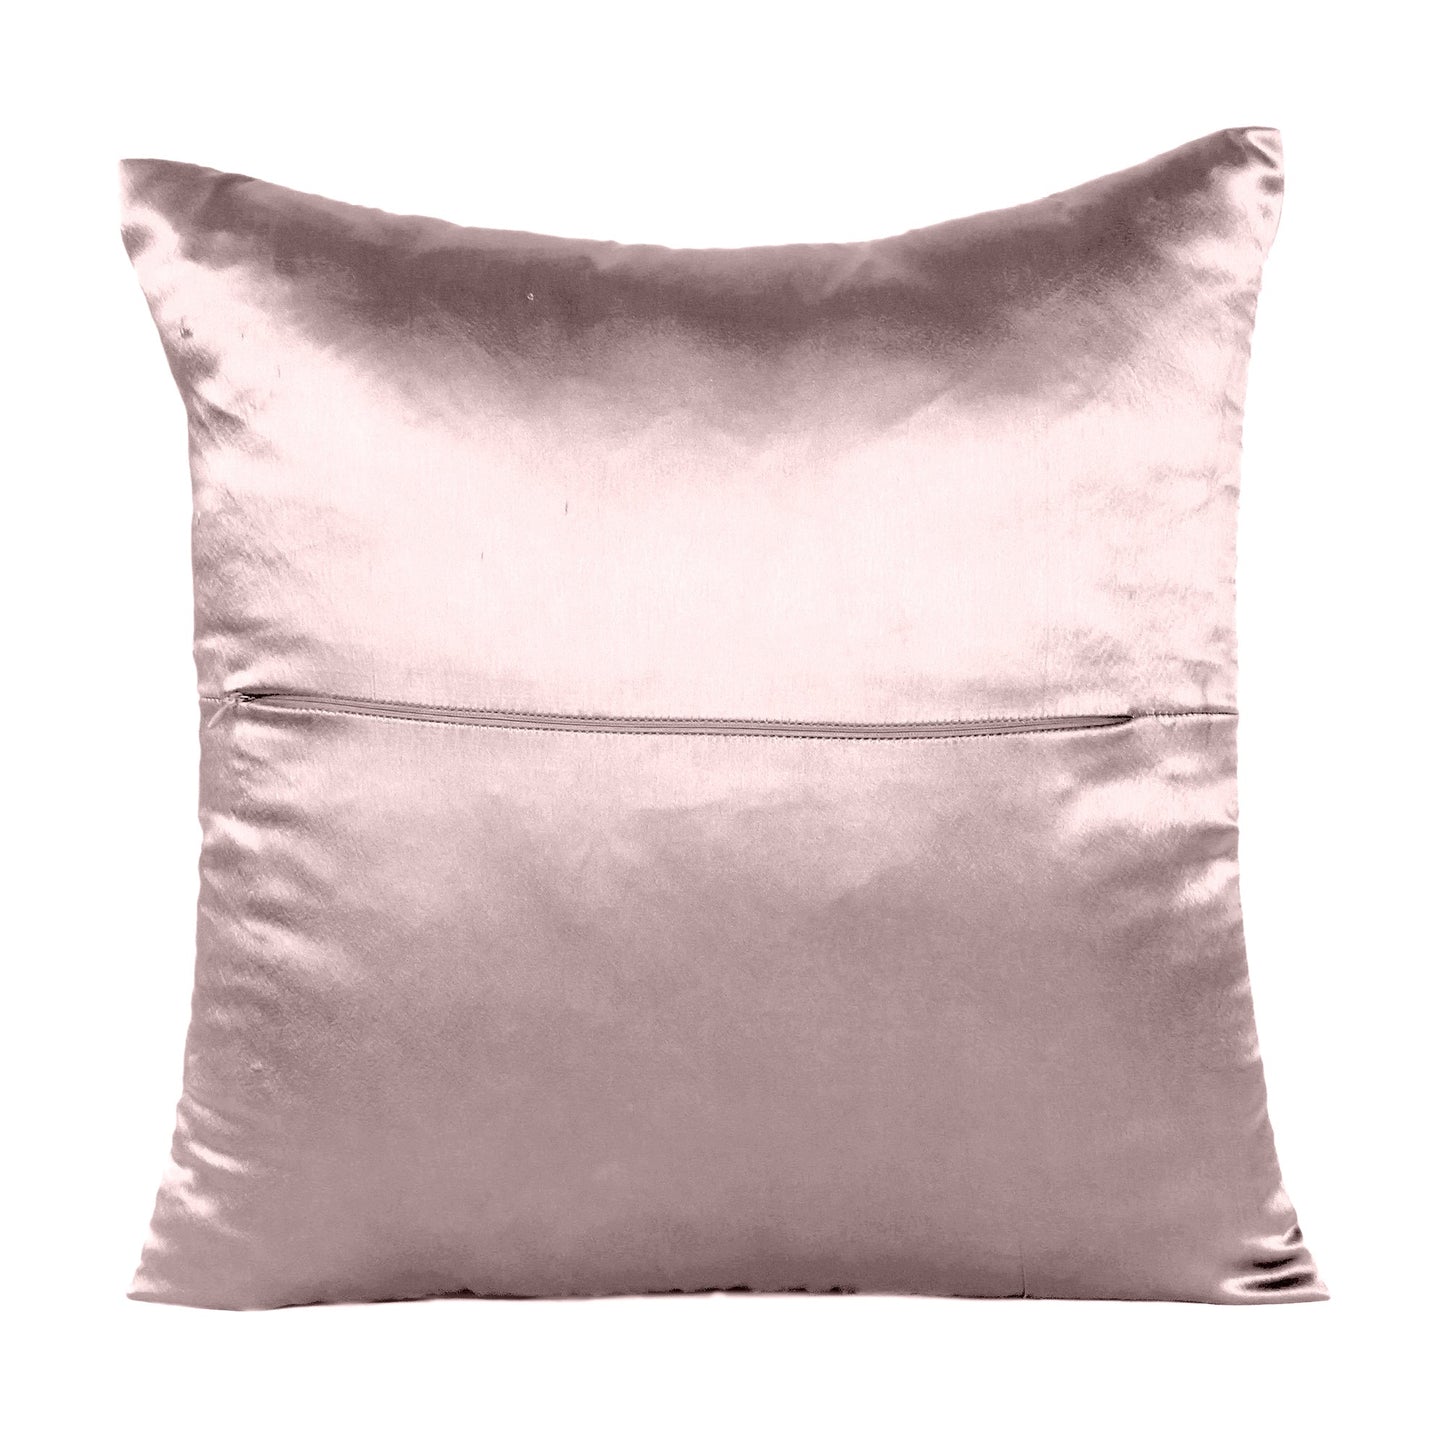 Luxury Soft Plain Satin Silk Cushion Cover in Set of 2 - Crystal Rose